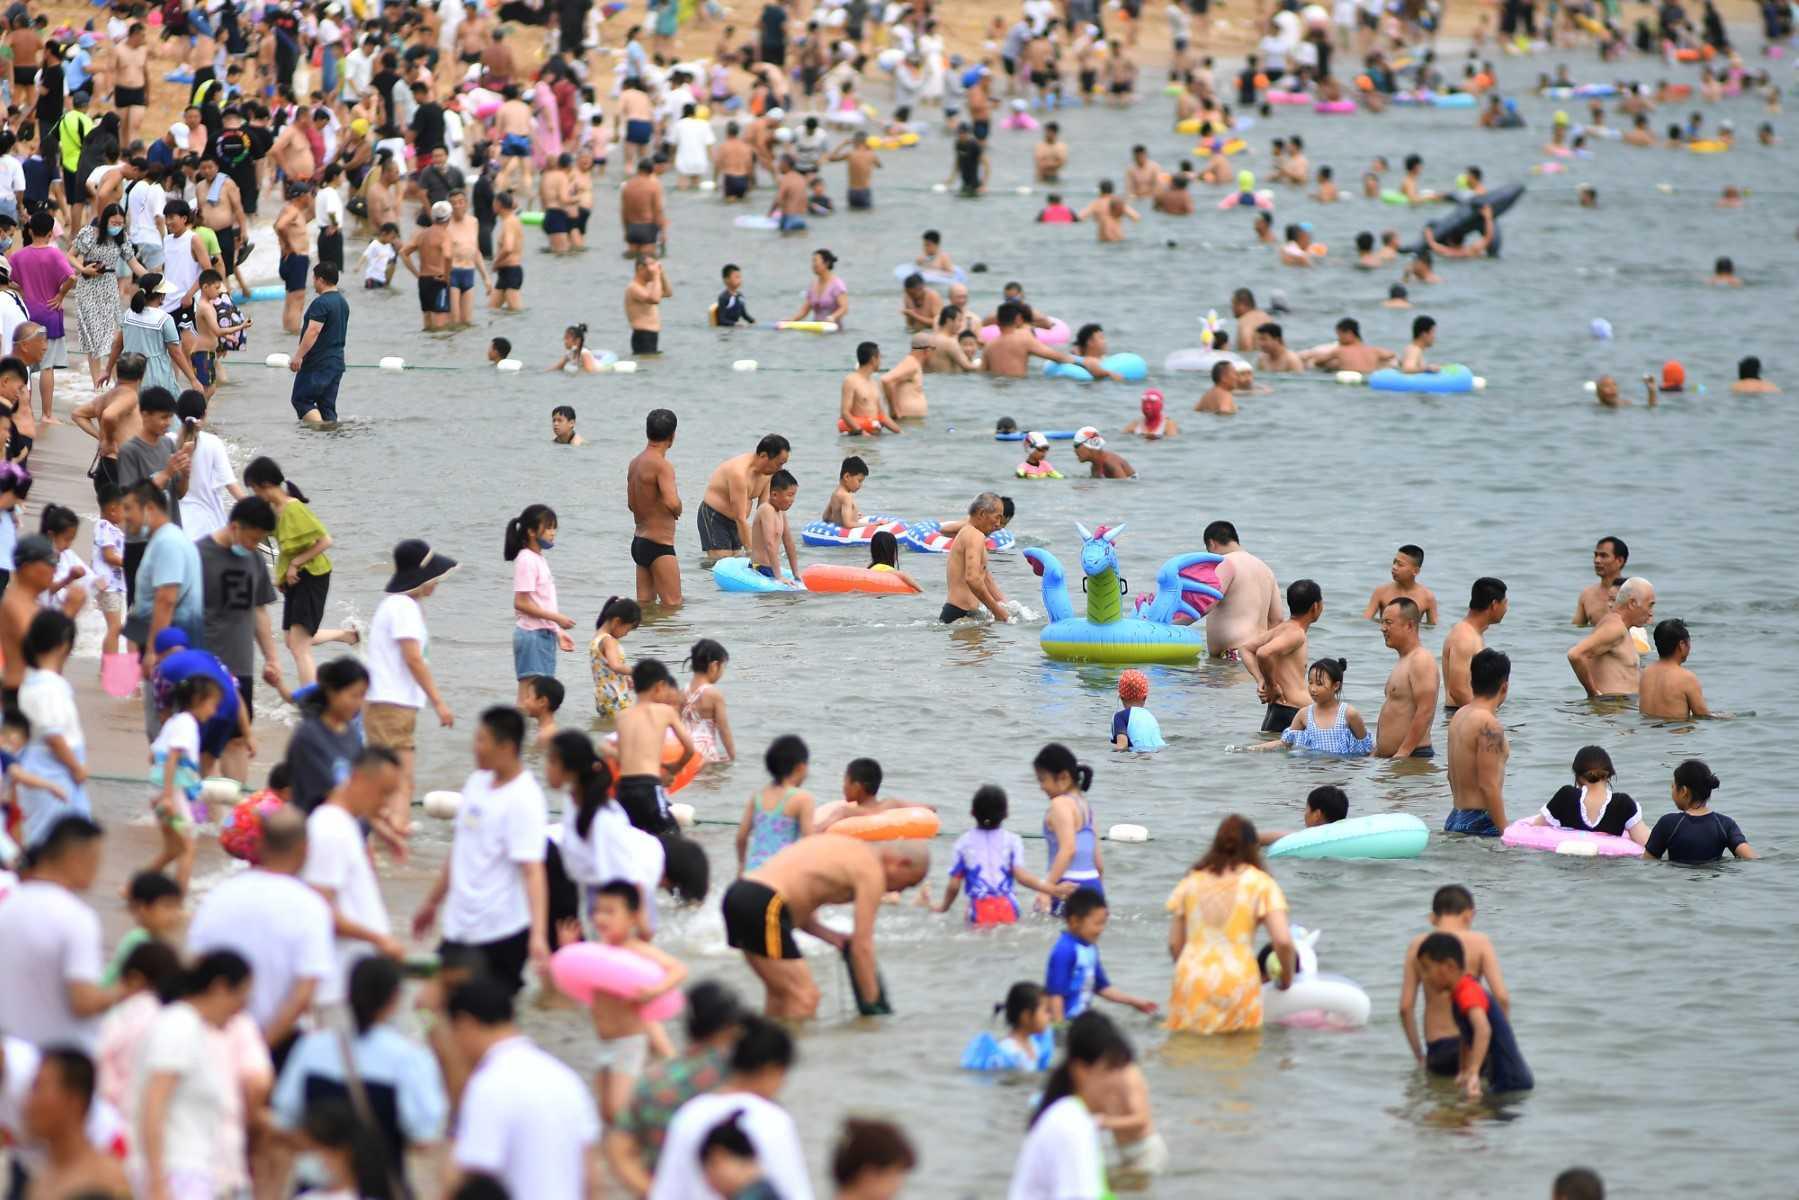 This photo taken on July 10 shows people cooling off on a beach in Qingdao, in China's eastern Shandong province. Photo: AFP